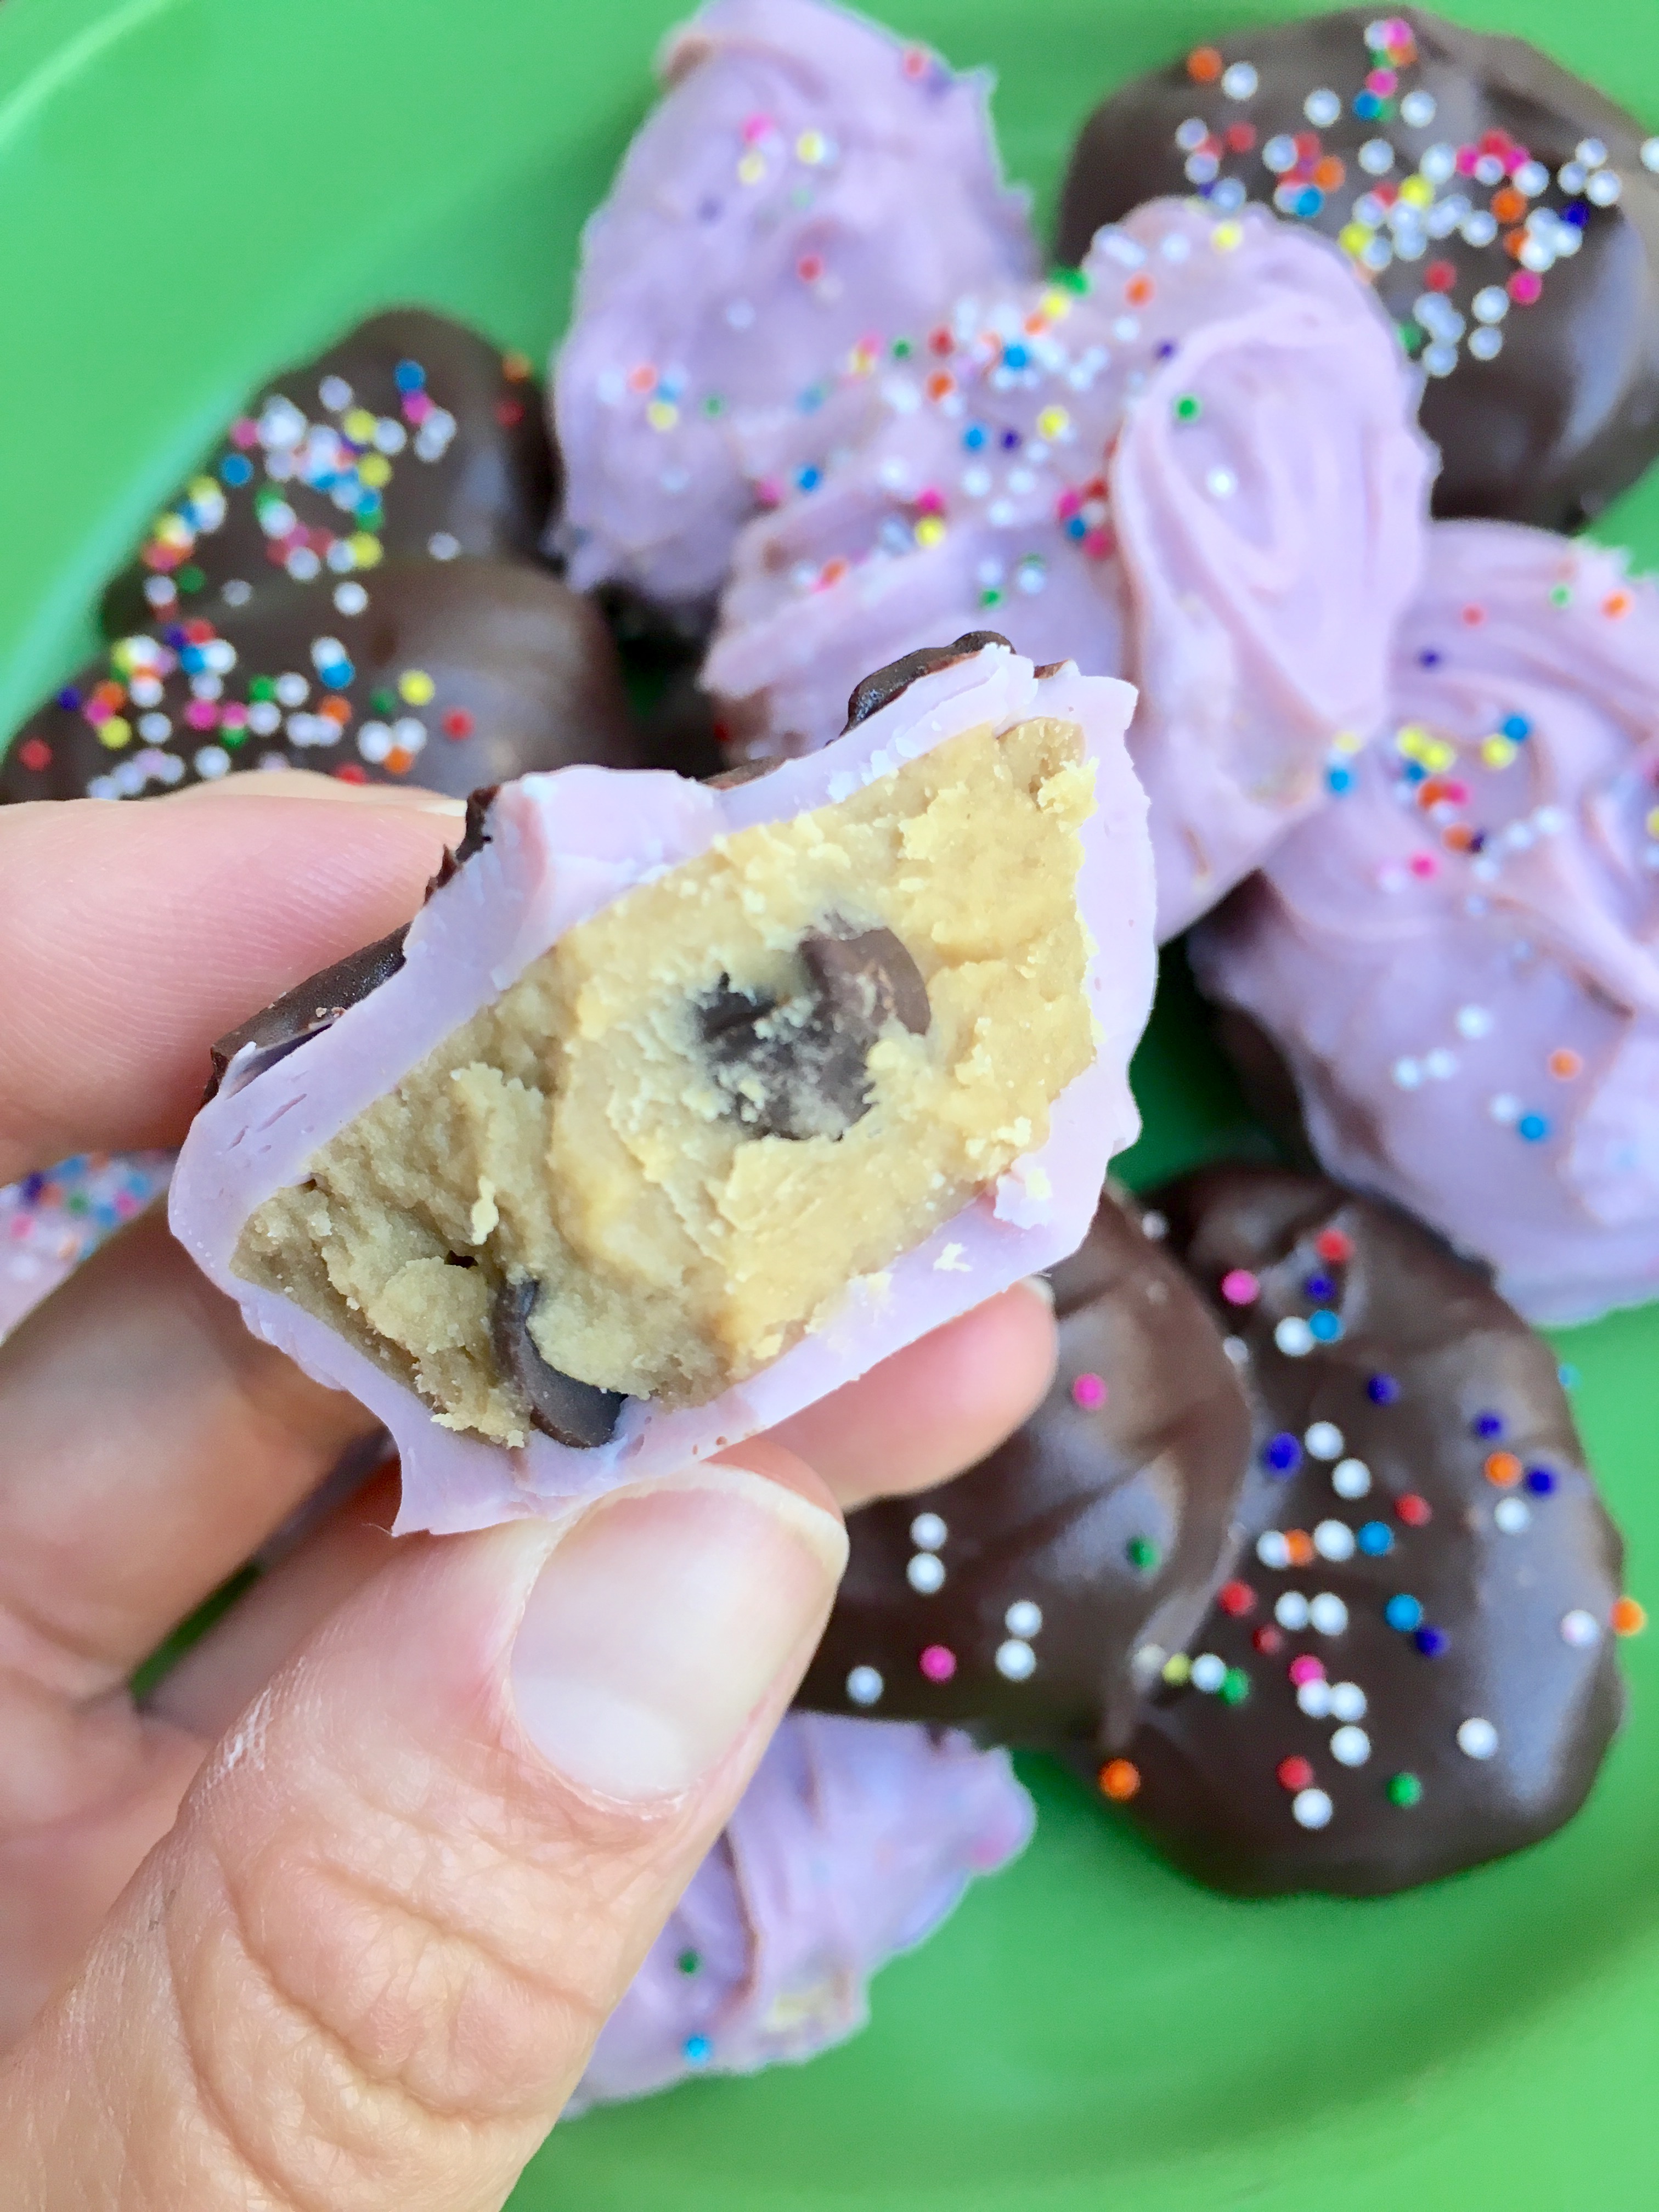 These protein-laced Chocolate Chip Cookie Dough Easter Eggs take it to the next level with their creamy cookie dough filling!